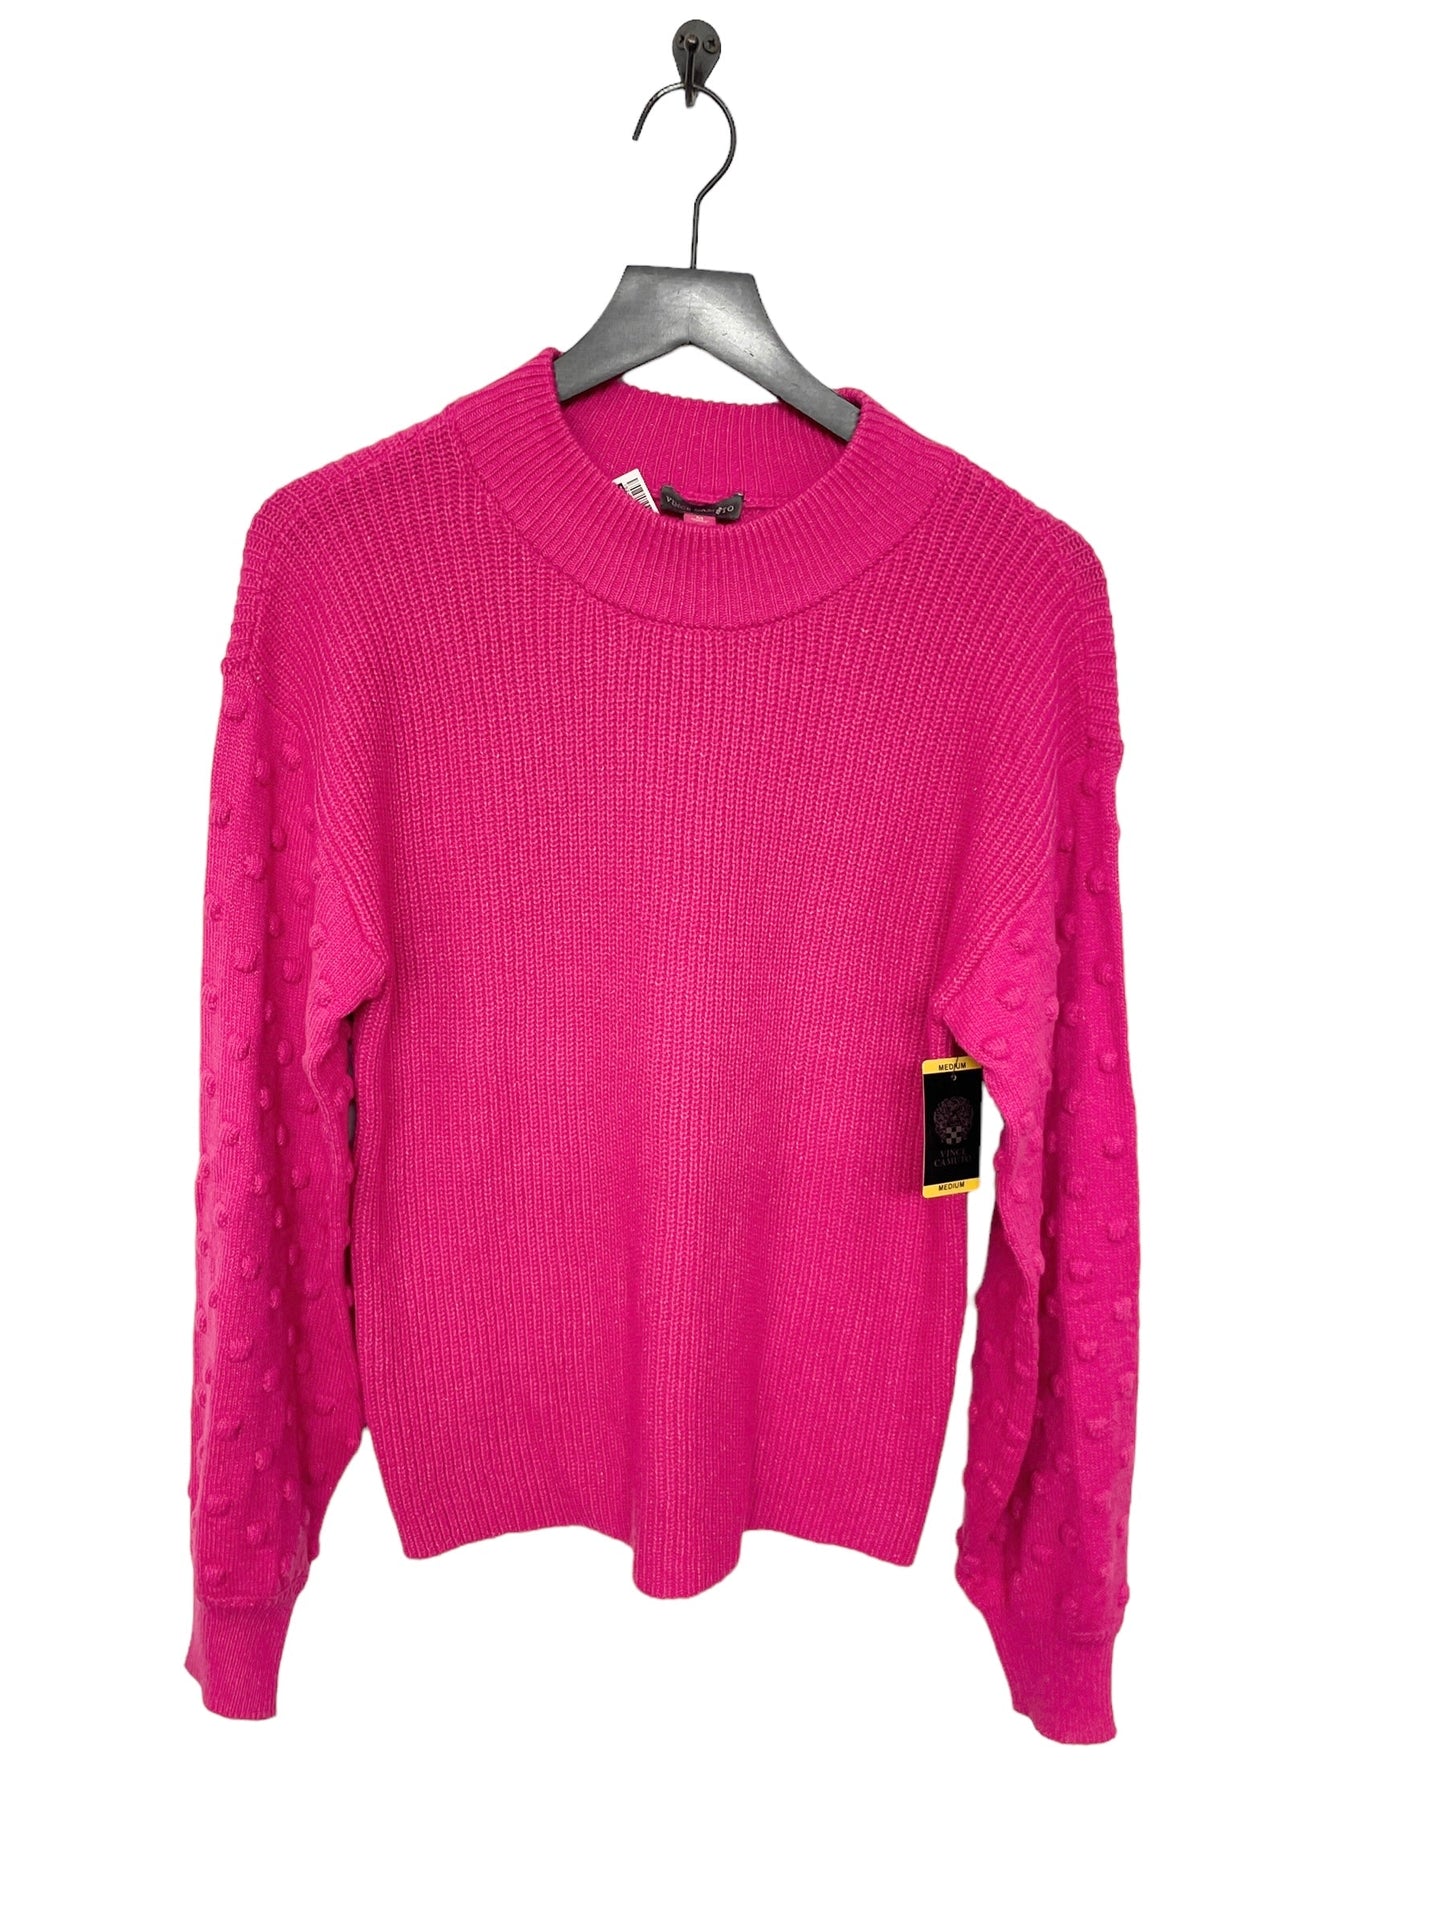 Pink Sweater Vince Camuto, Size M